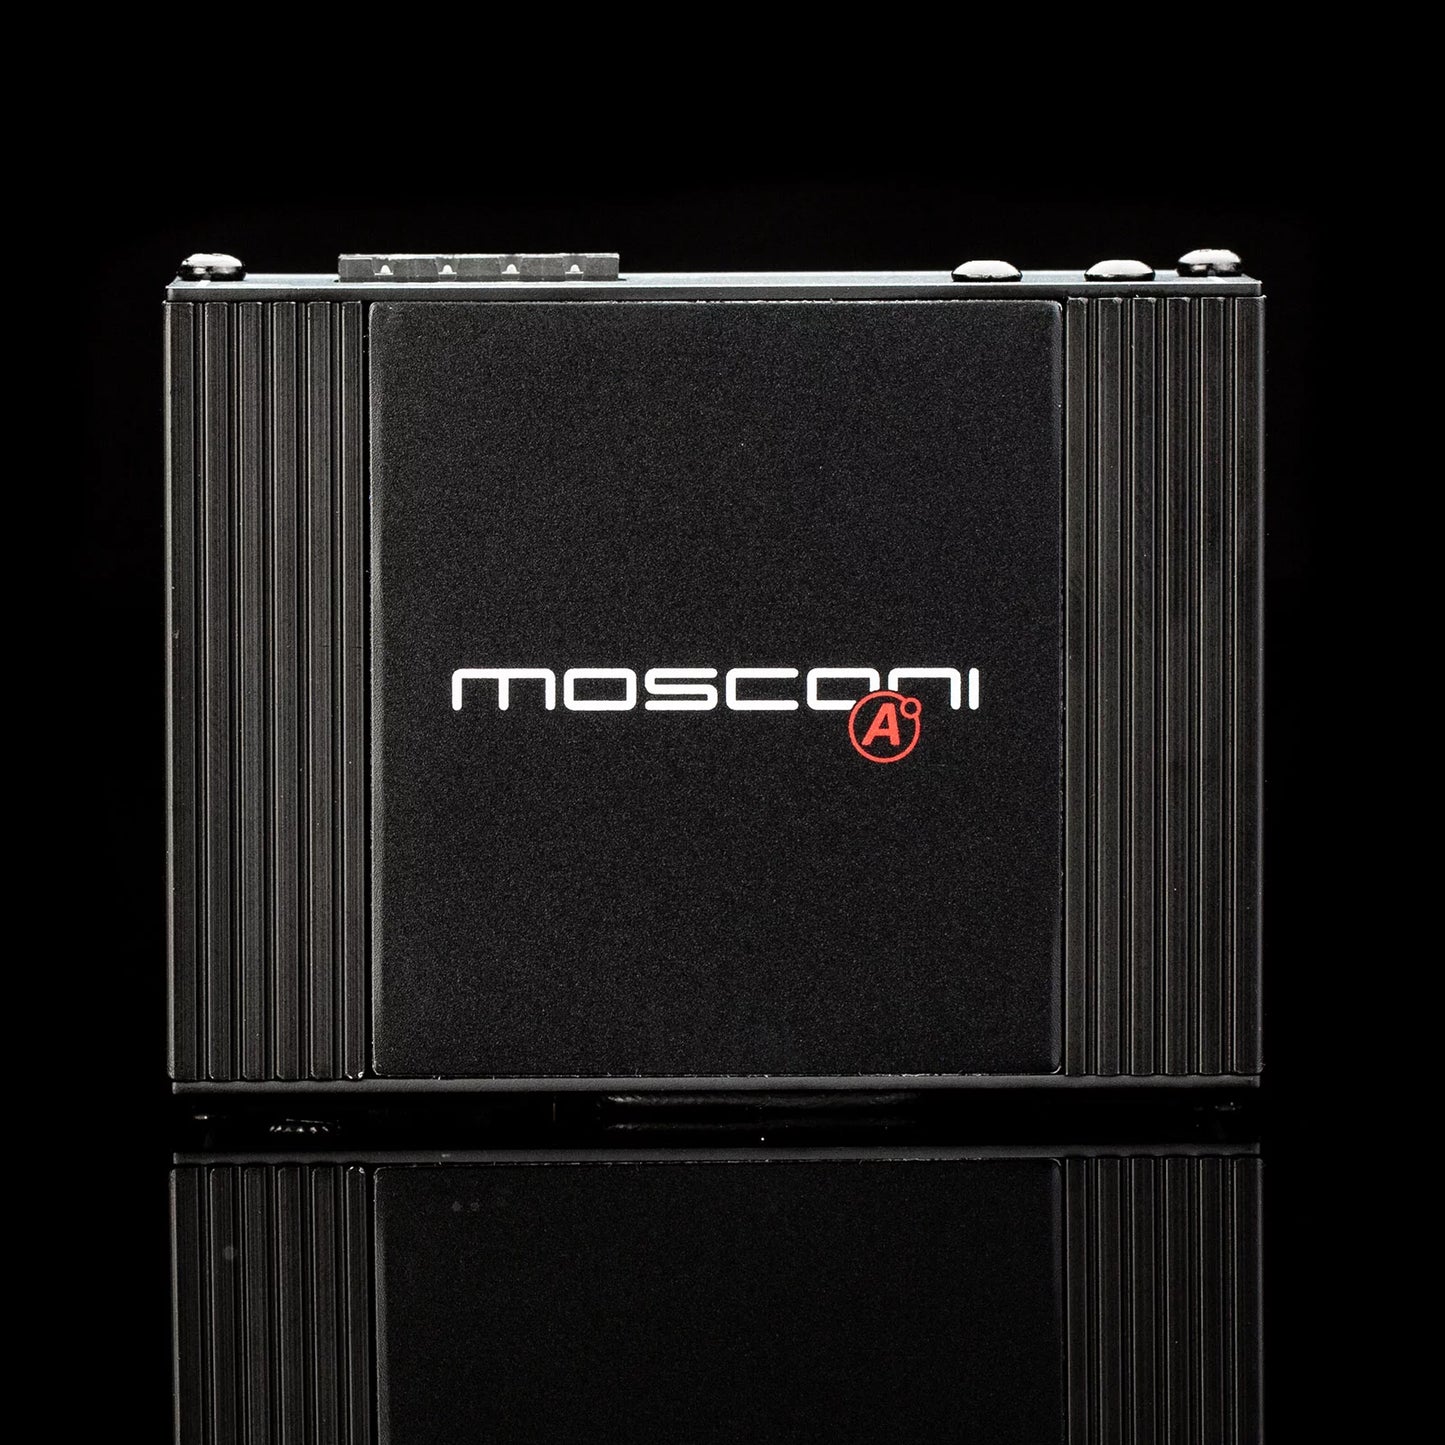 MOSCONI ATOMO 2 CLASS-D 2-CHANNEL AMPLIFIER